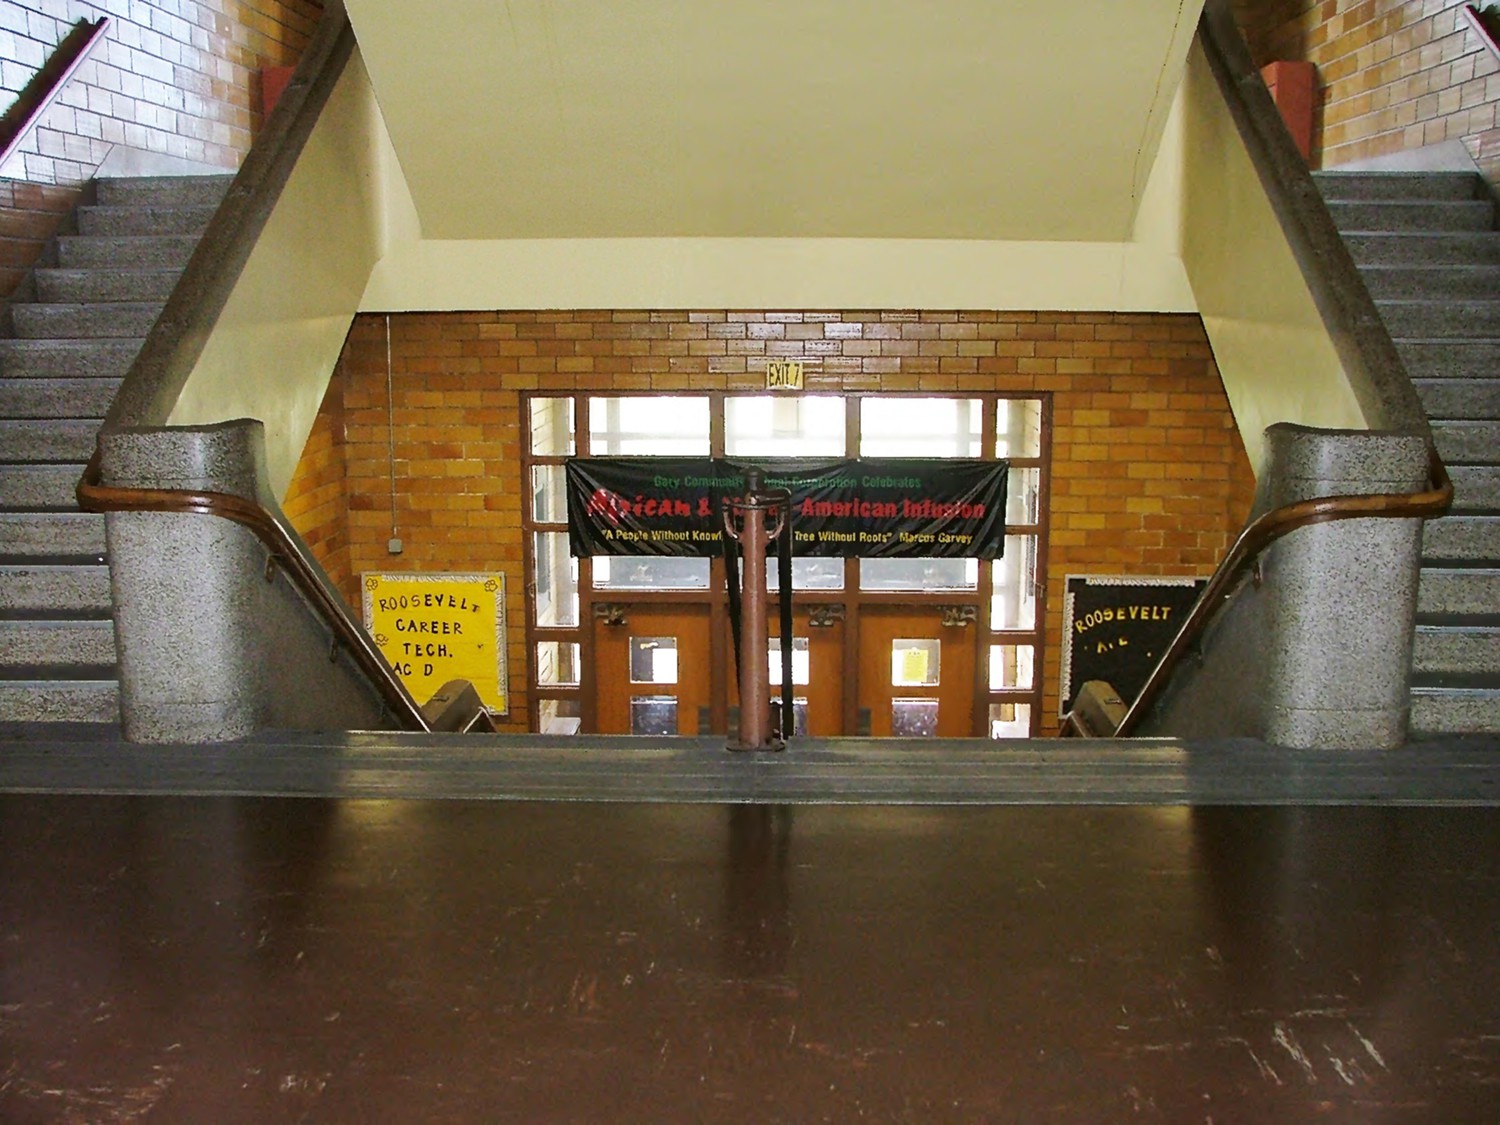 Theodore Roosevelt High School, Gary Indiana Central stairwell and entry from second floor landing. Camera facing south (2012)